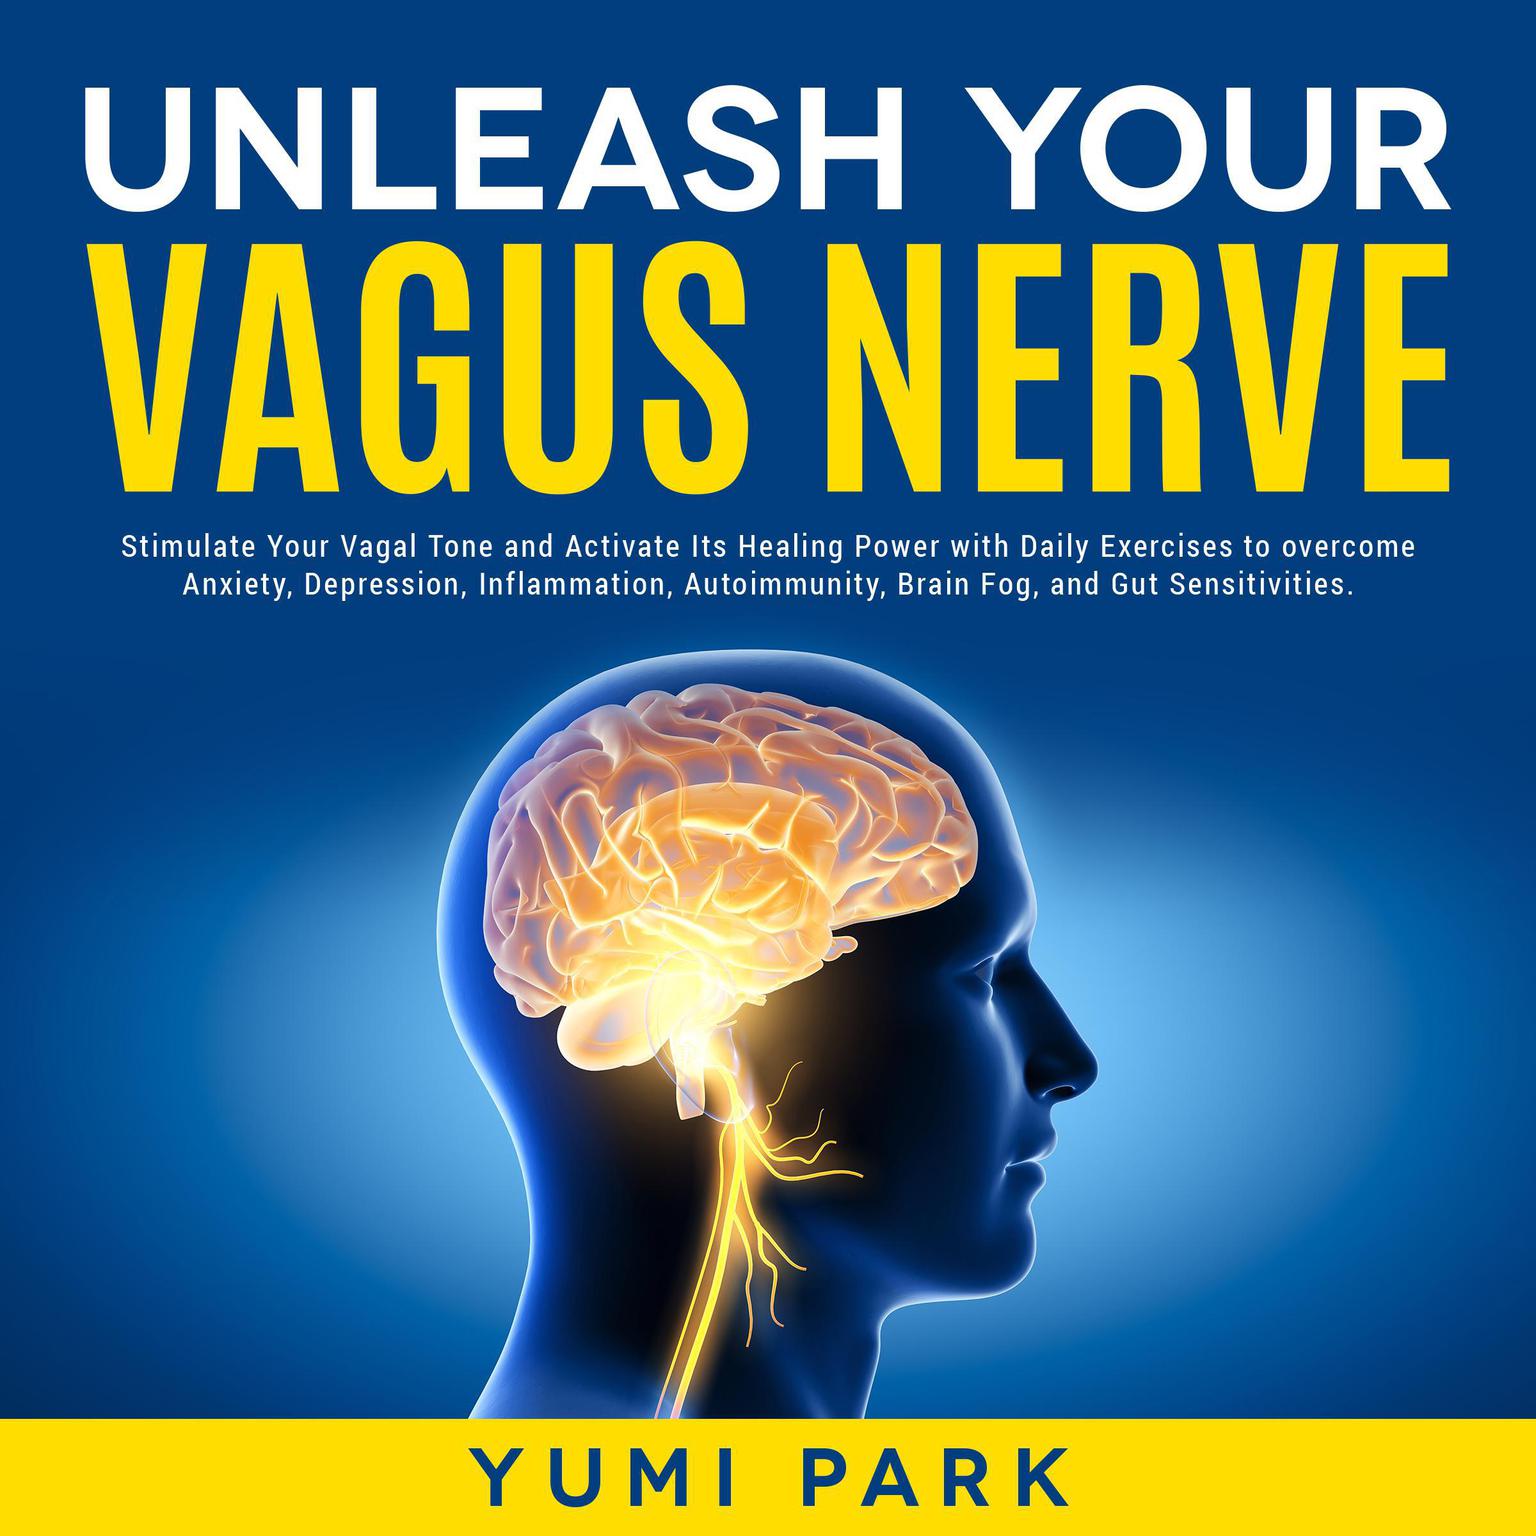 Unleash Your Vagus Nerve: Stimulate Your Vagal Tone and Activate Its Healing Power with Daily Exercises to overcome Anxiety, Depression, Inflammation, Autoimmunity, Brain Fog, and Gut Sensitivities. Audiobook, by Yumi Park